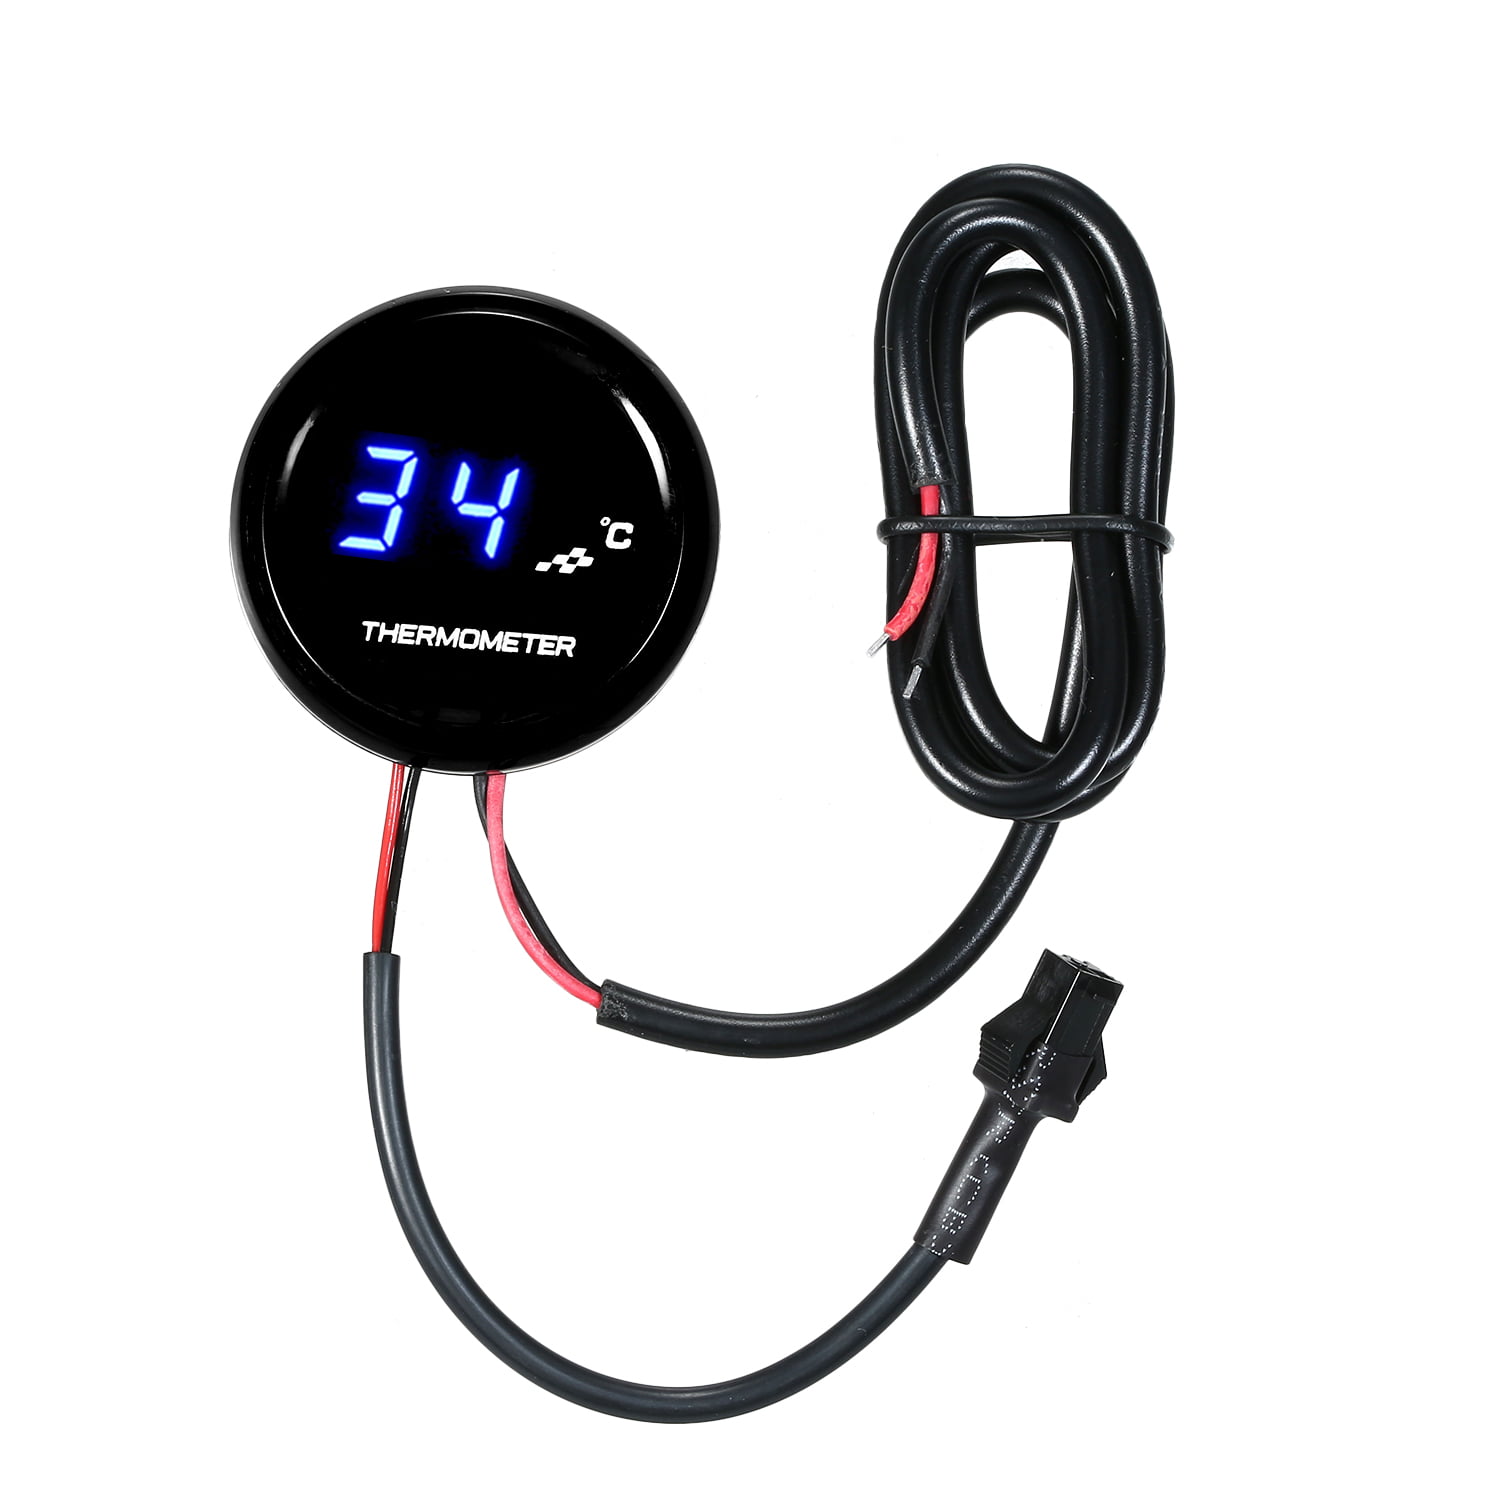 Gorgeri Motorcycle Digital Thermometer Water Temperature Meter Gauge Motorcycle Universal Thermometer with Blue Light 